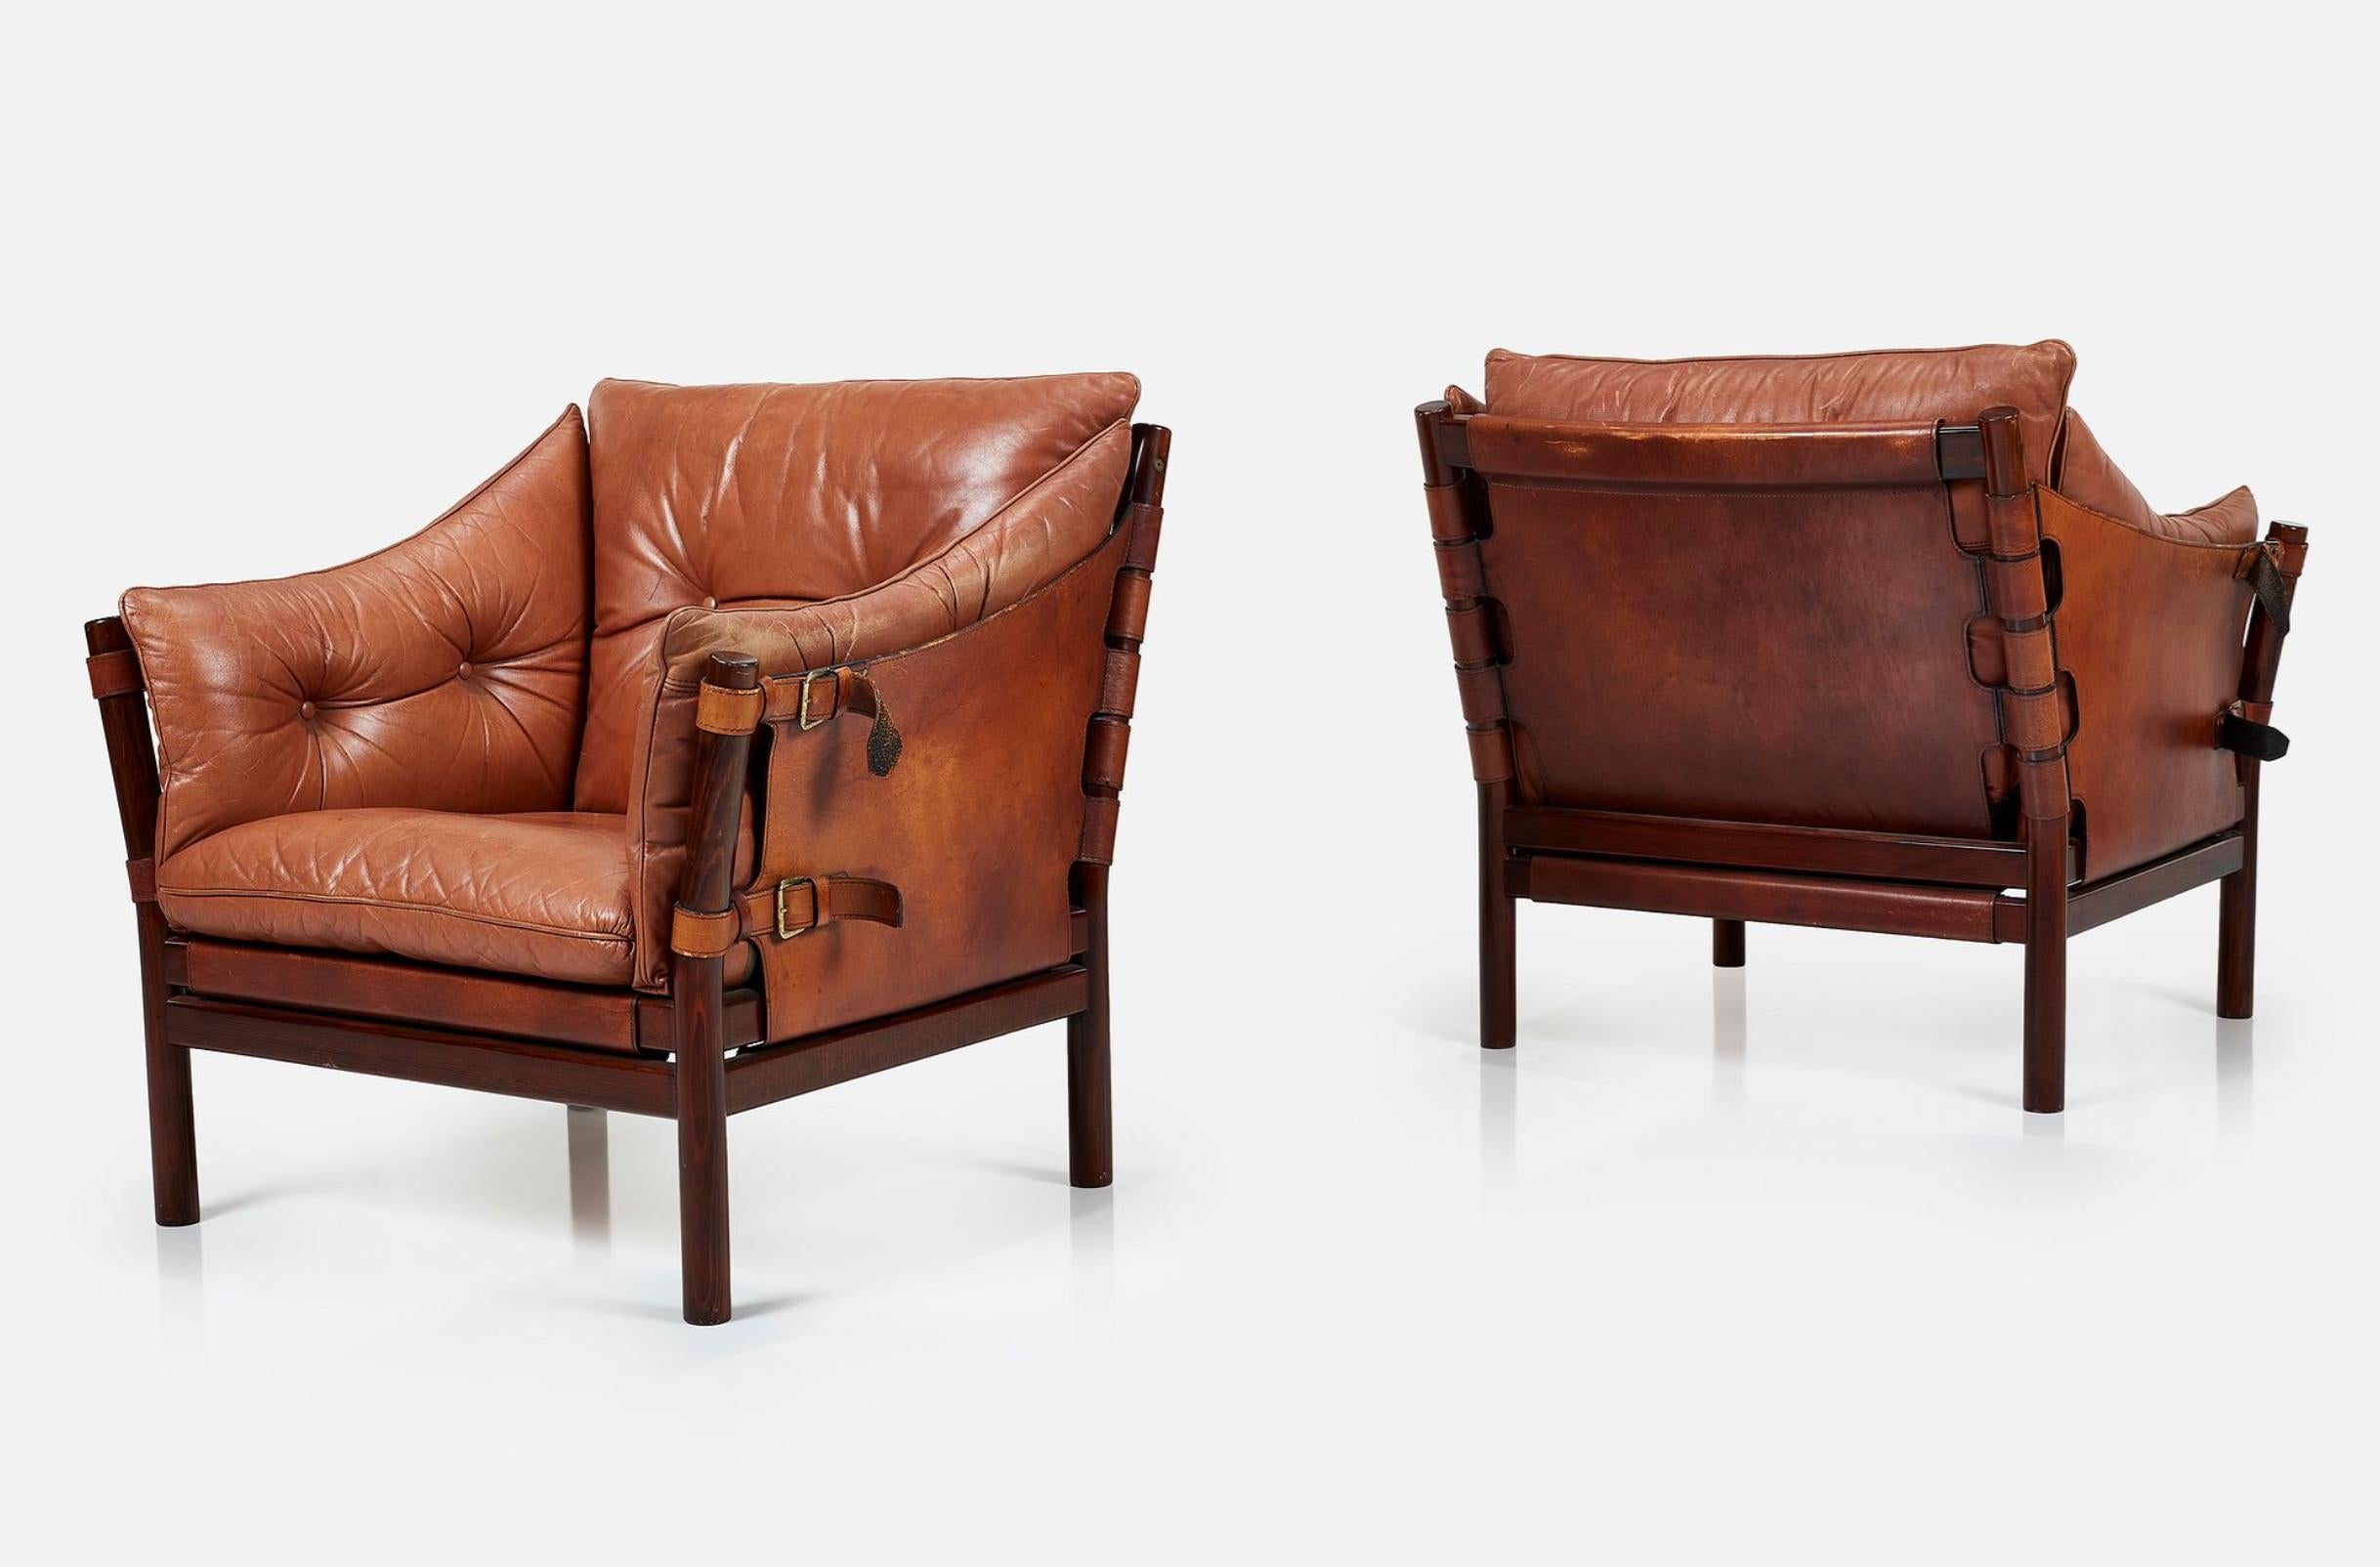 Pair of stunning leather and rosewood 'Ilona' lounge chairs by Arne Norell, circa 1971.

Leather, rosewood, fabric, brass. Manufactured by Norrel Mobel AB, Sweden.

Classic Arne Norell design features a very clever construction which creates a